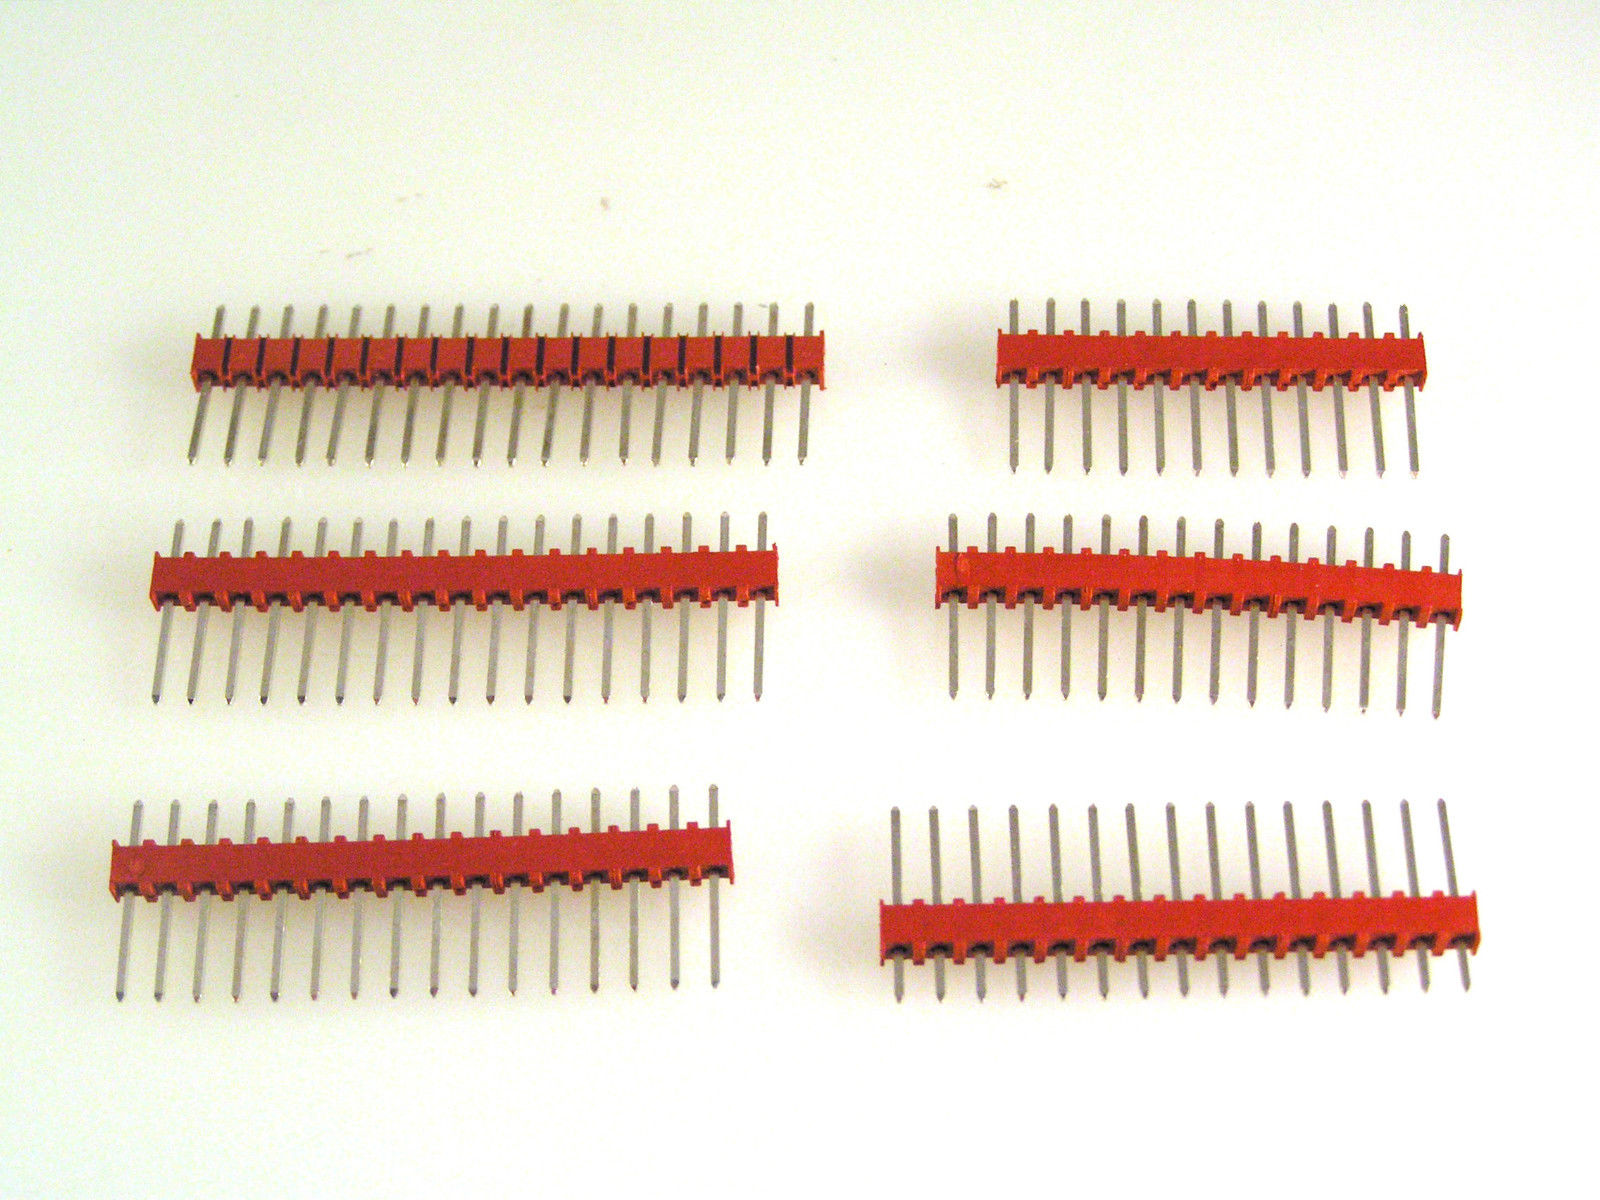 PCB SIL Pin Header 0.1 inch Pitch Vertical Range 12-18 Way 5 Pieces EB7